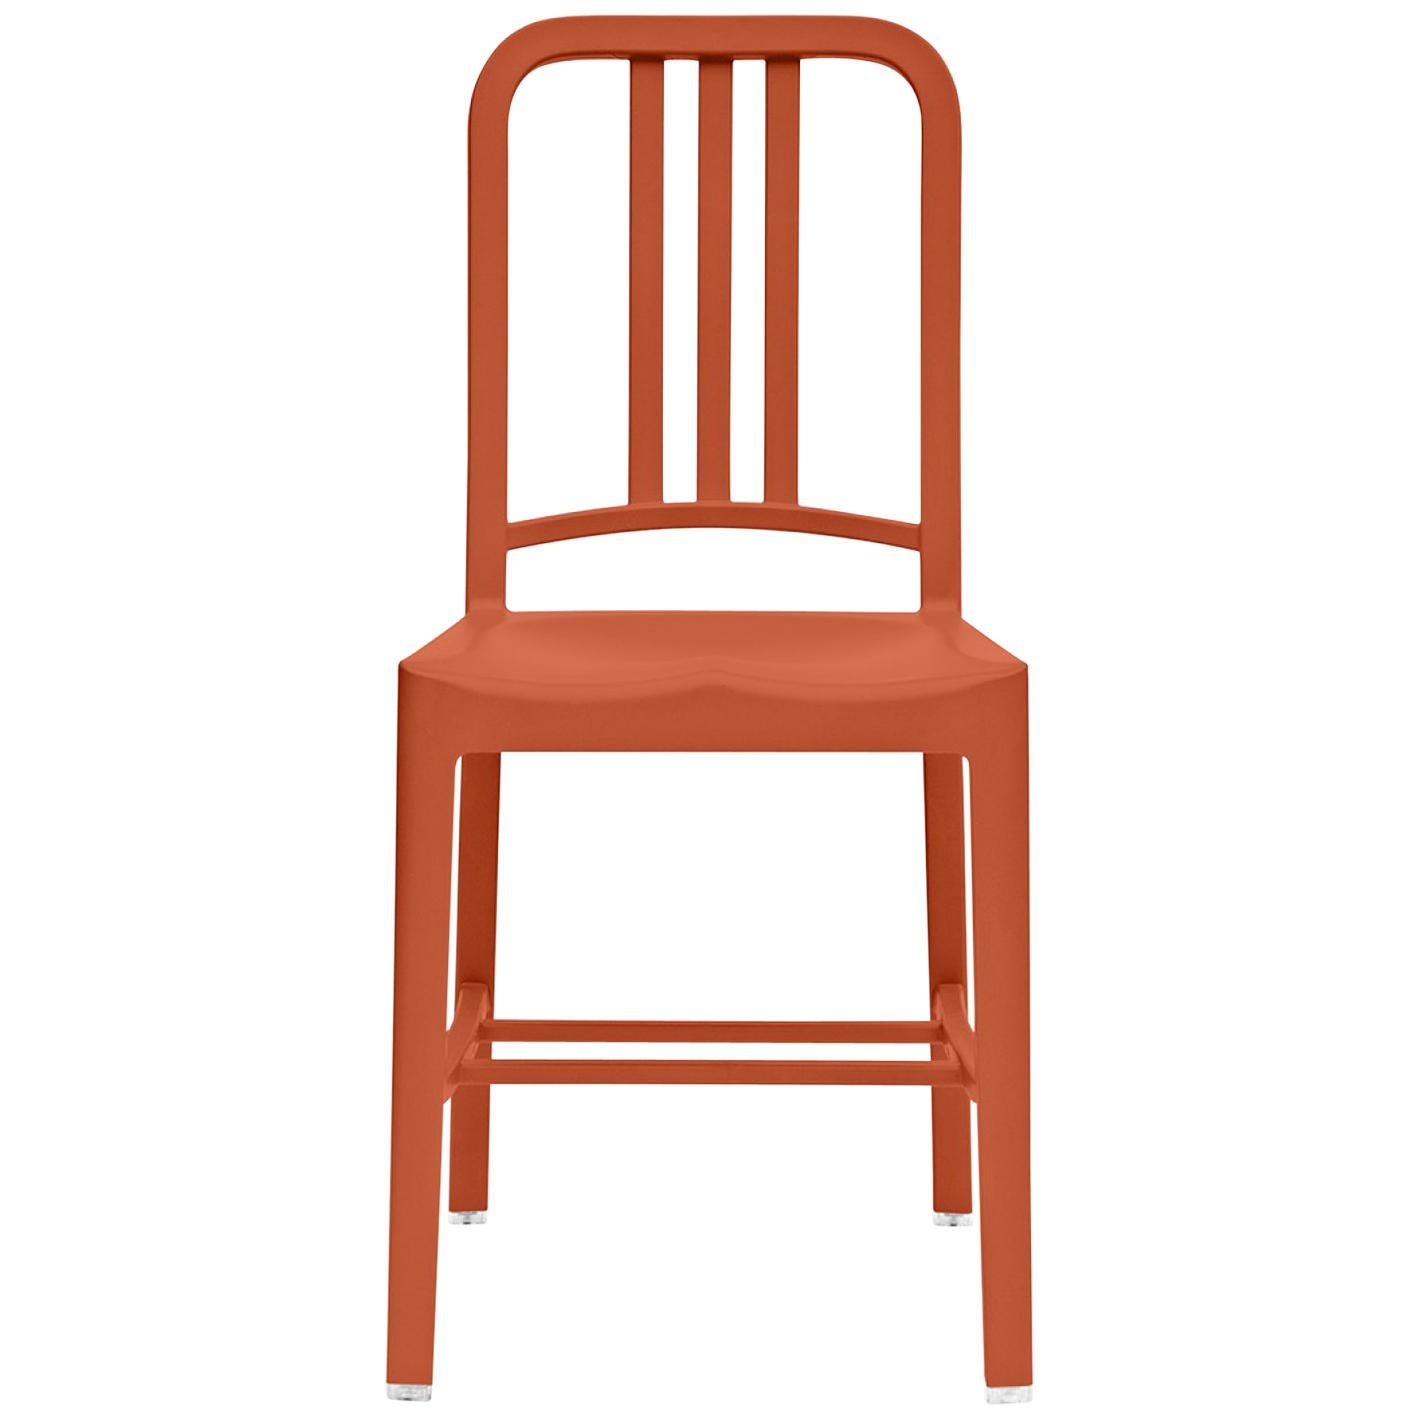 Emeco 111 Navy Chair in Persimmon by Coca-Cola